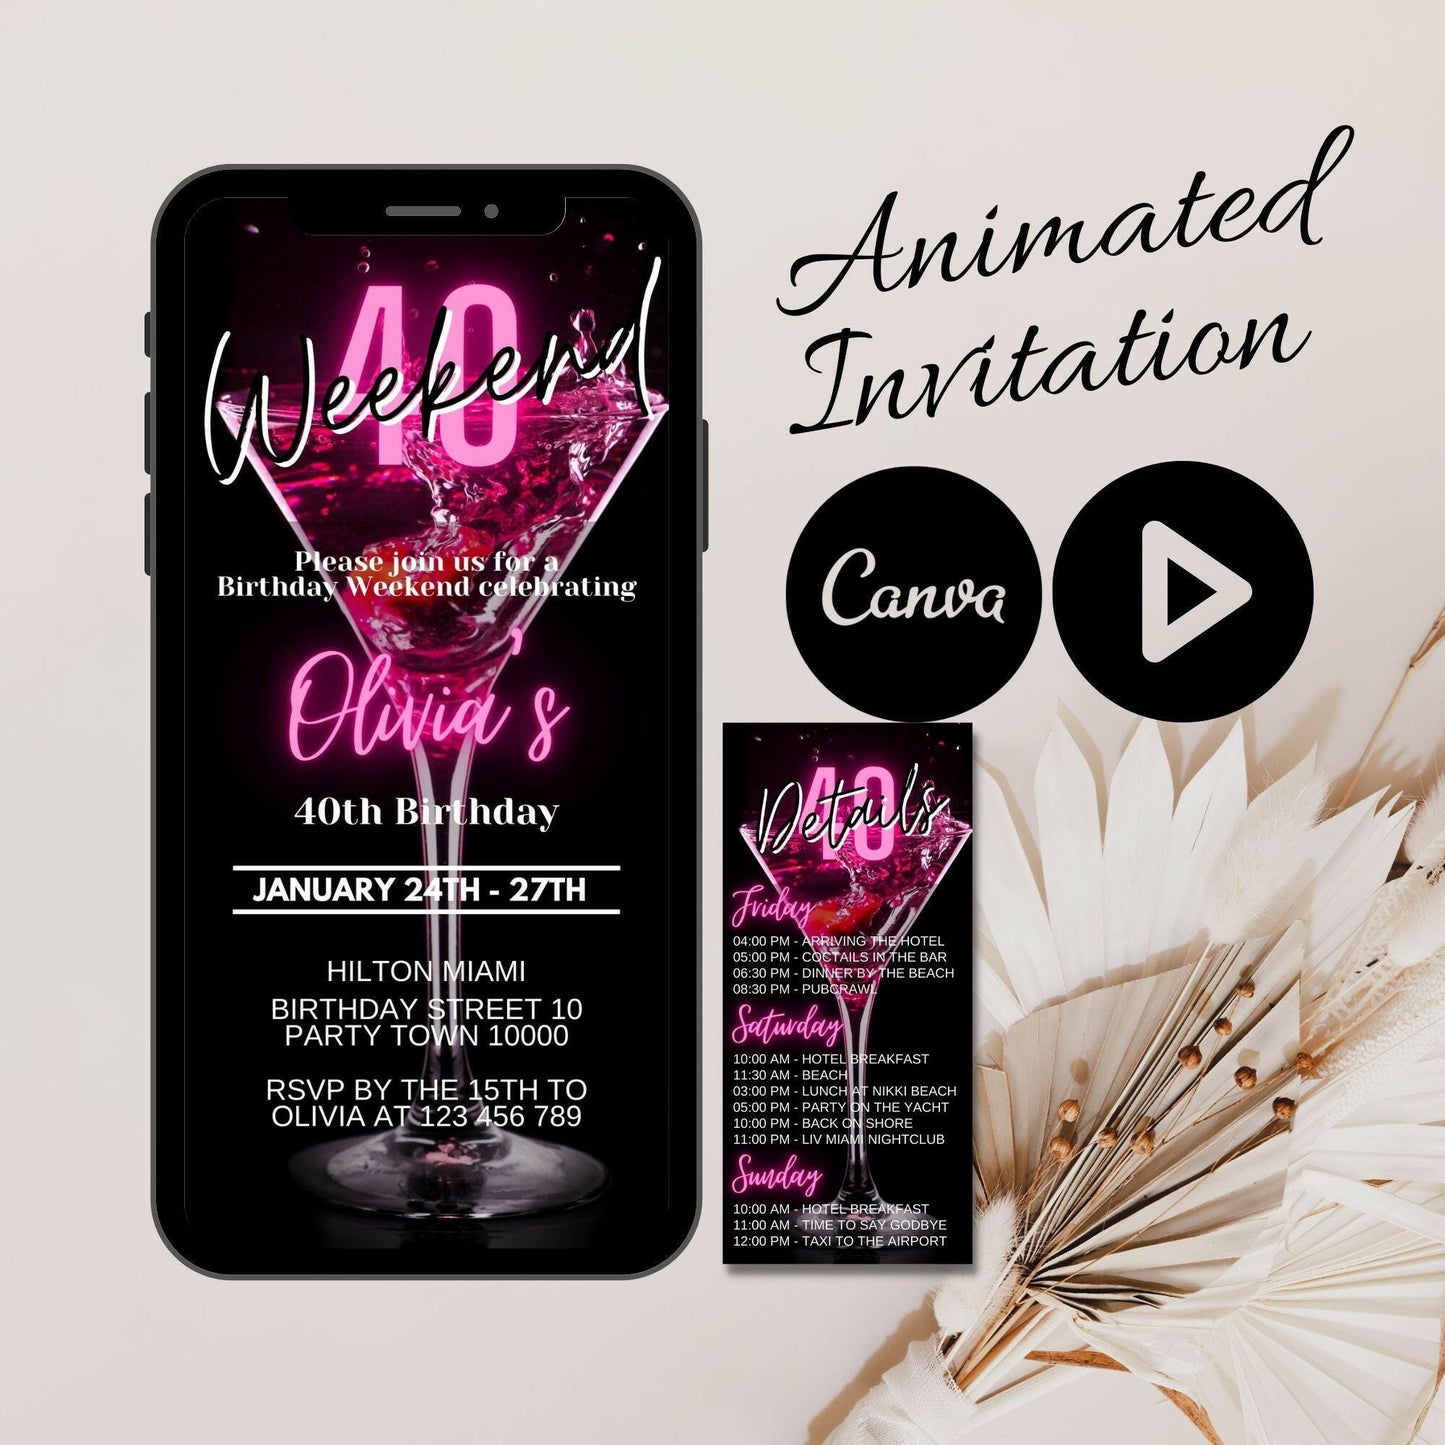 Hot Pink weekend invitation and Itinerary template, Video Invitation for her, Animated Mobile Birthday Invite, Drink Birthday weekend detail